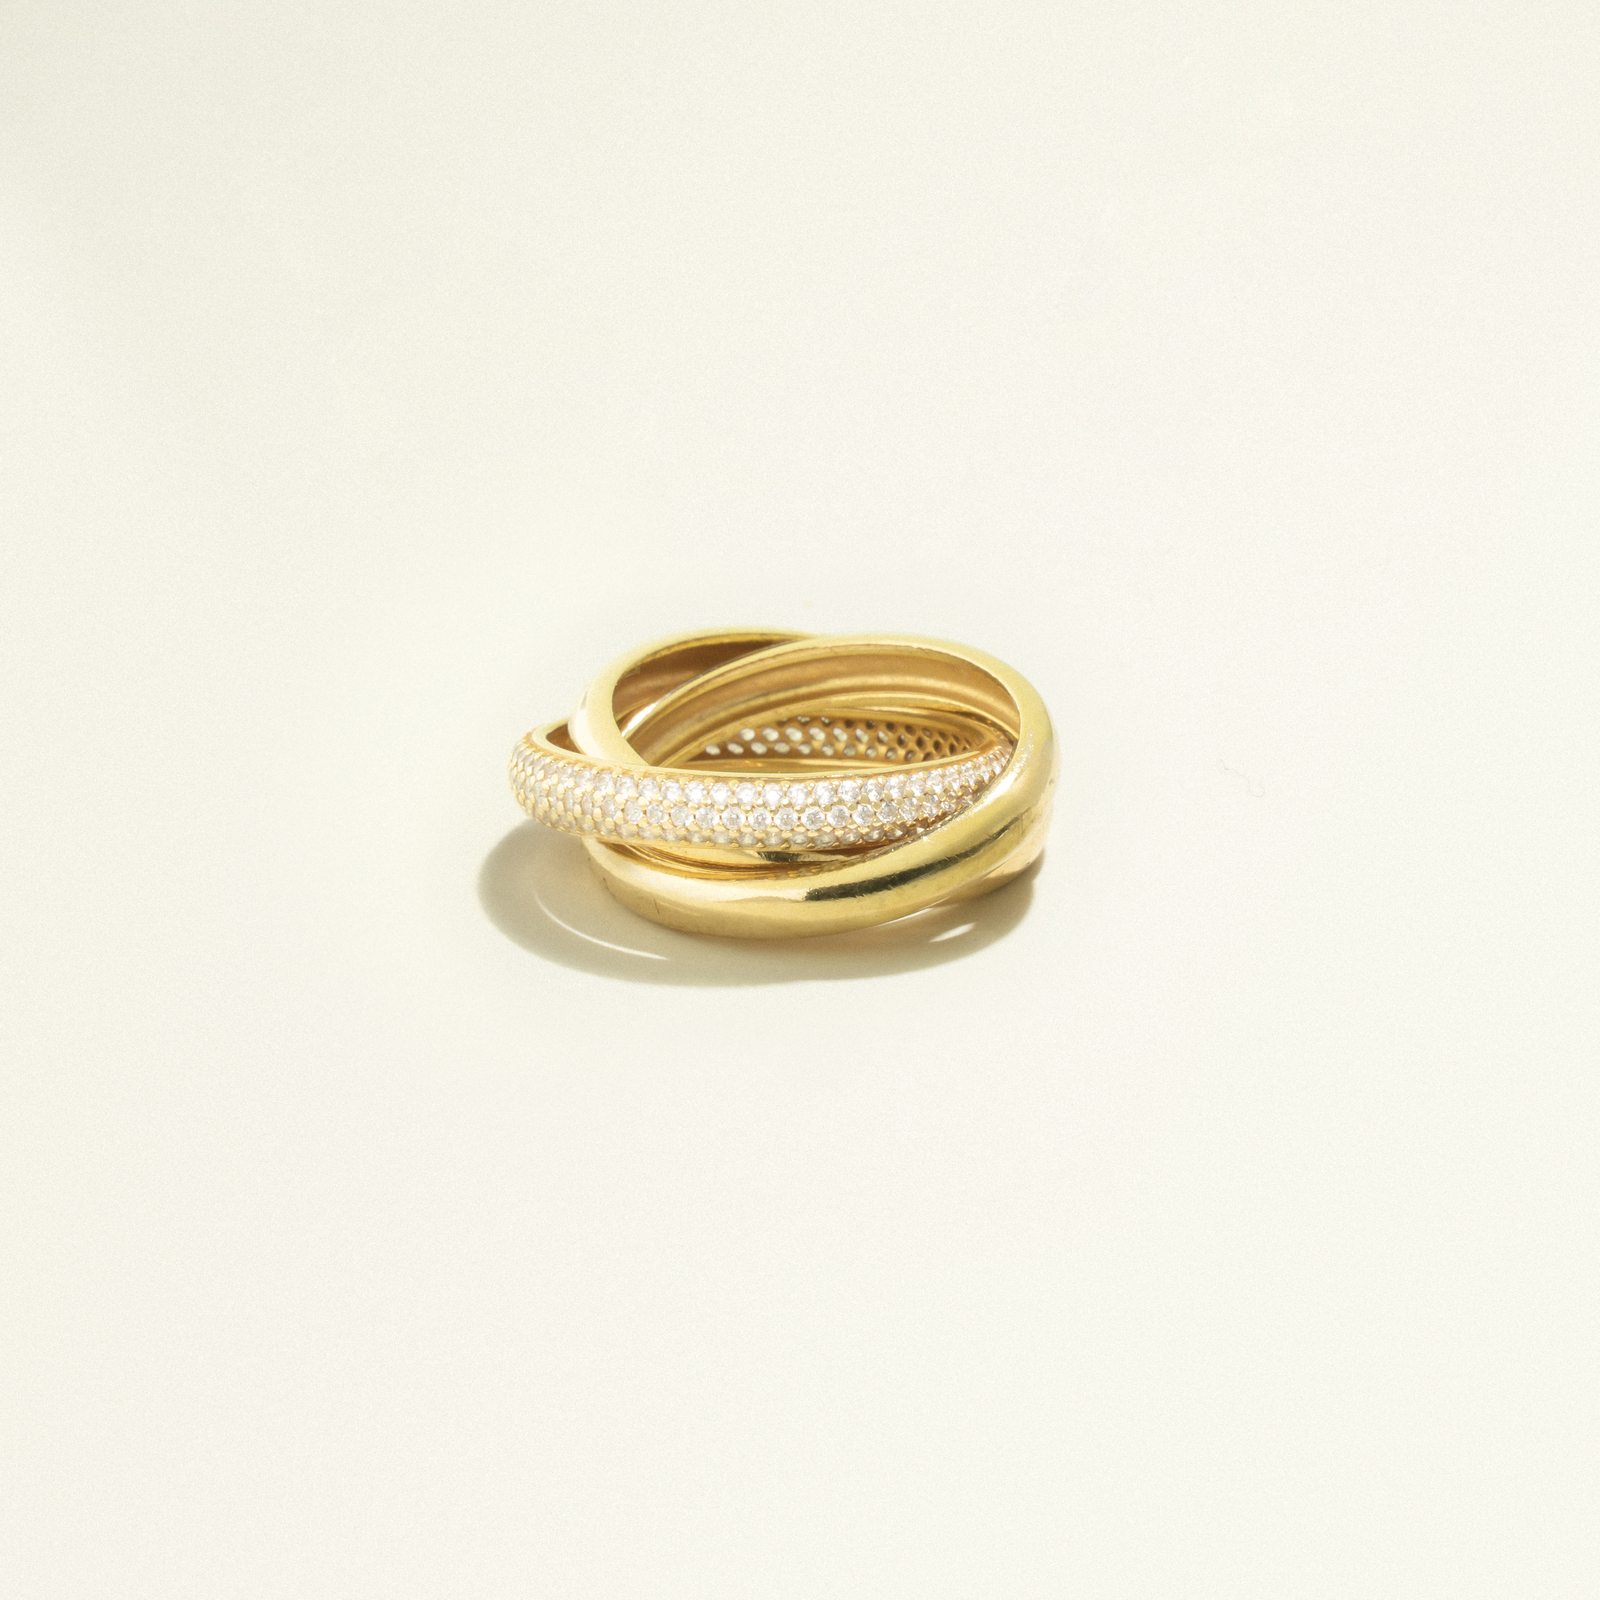 24Kt Gold Plated Guidance Ring with White Zirconias